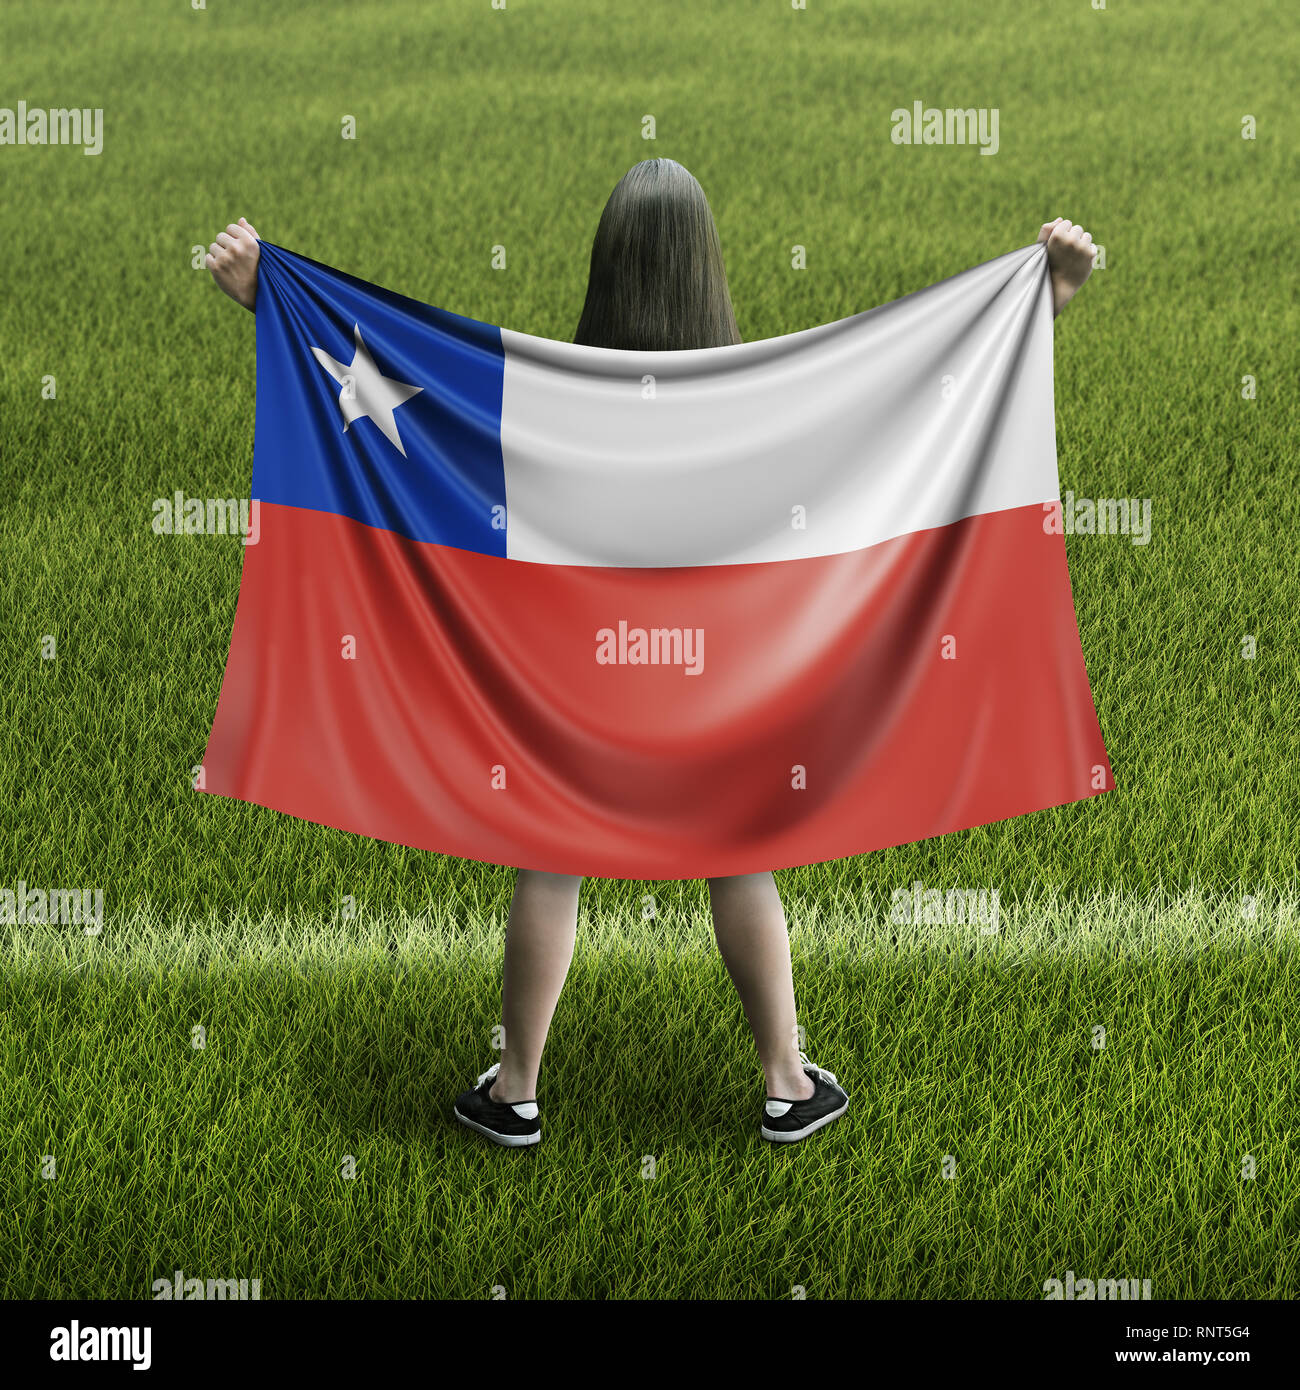 Women and flag Stock Photo